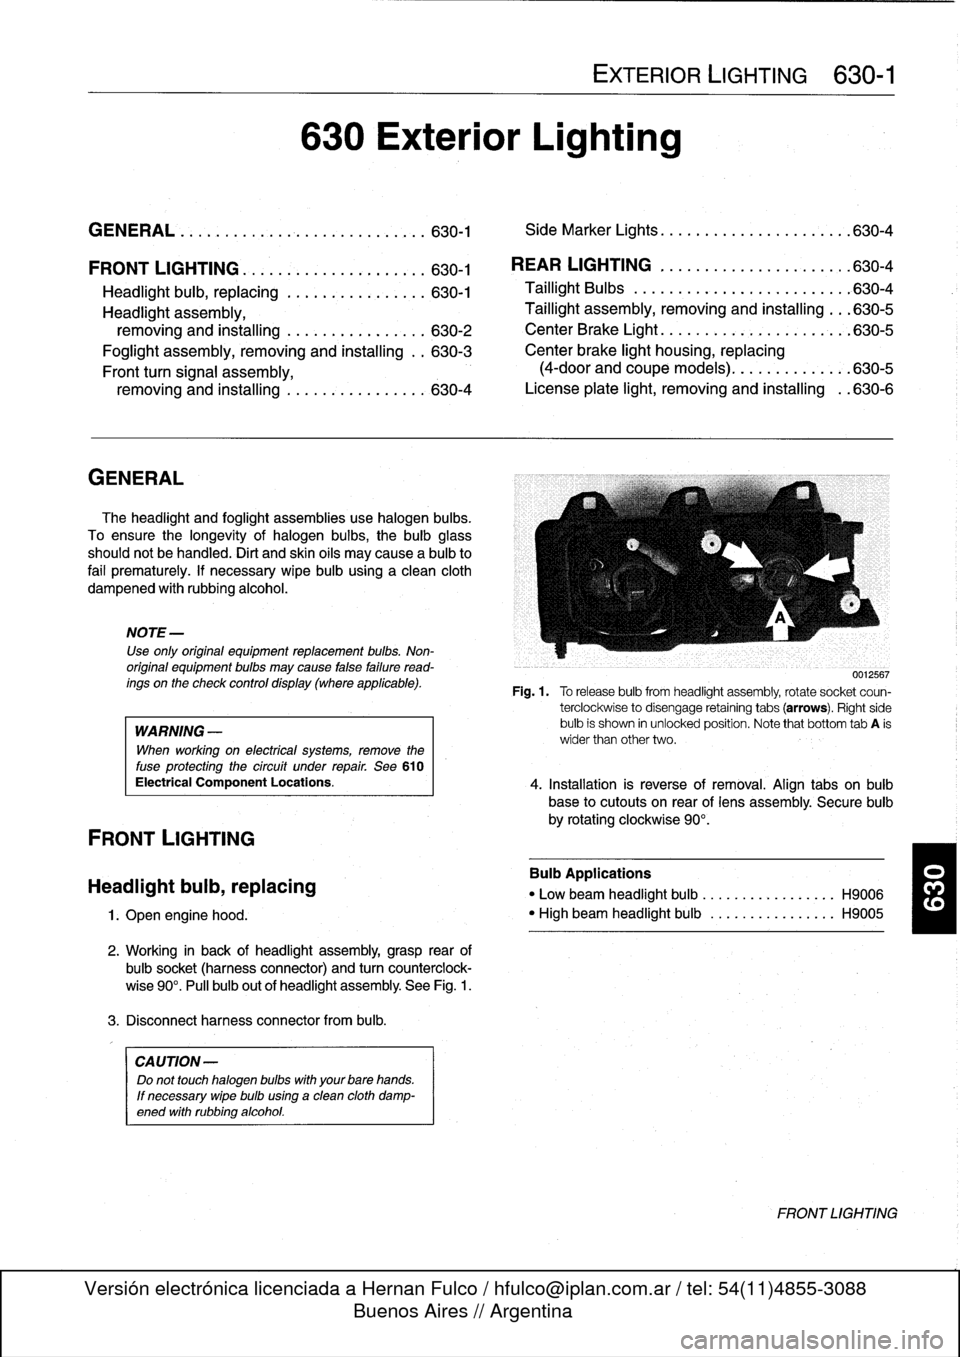 BMW 328i 1997 E36 Workshop Manual 
FRONT
LIGHTING
.
...........
.
....
.
.
.
.
630-1

Headlight
buib,
replacing
............
.
.
.
.
630-1
Headlight
assembly,

removing
and
installing
.......
.
....
.
.
.
.
630-2

Foglight
assembly,
r